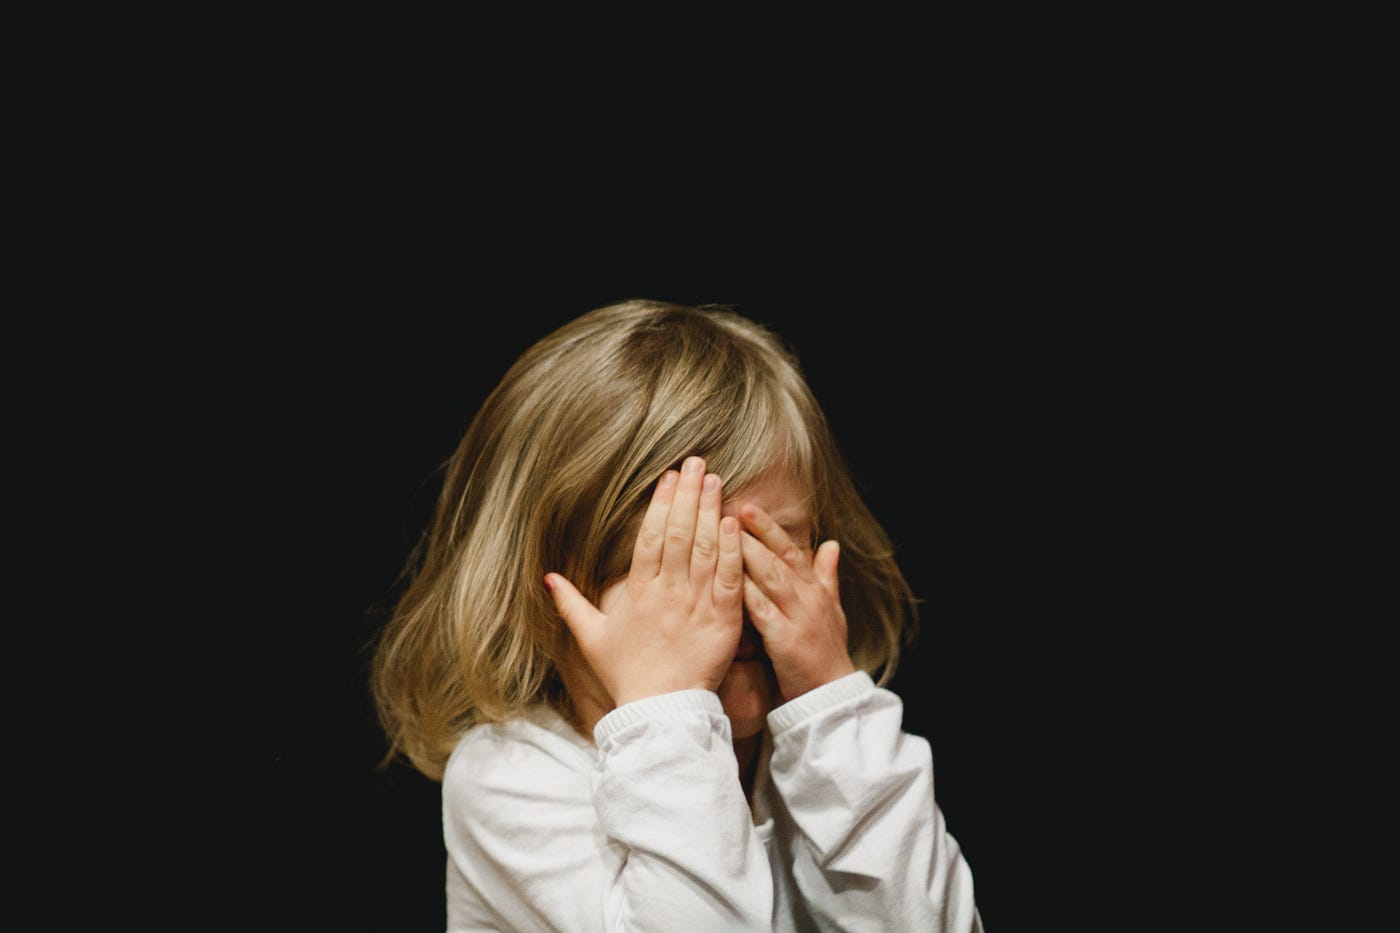 Little girl covering her eyes feeling sorry, in front of a black background